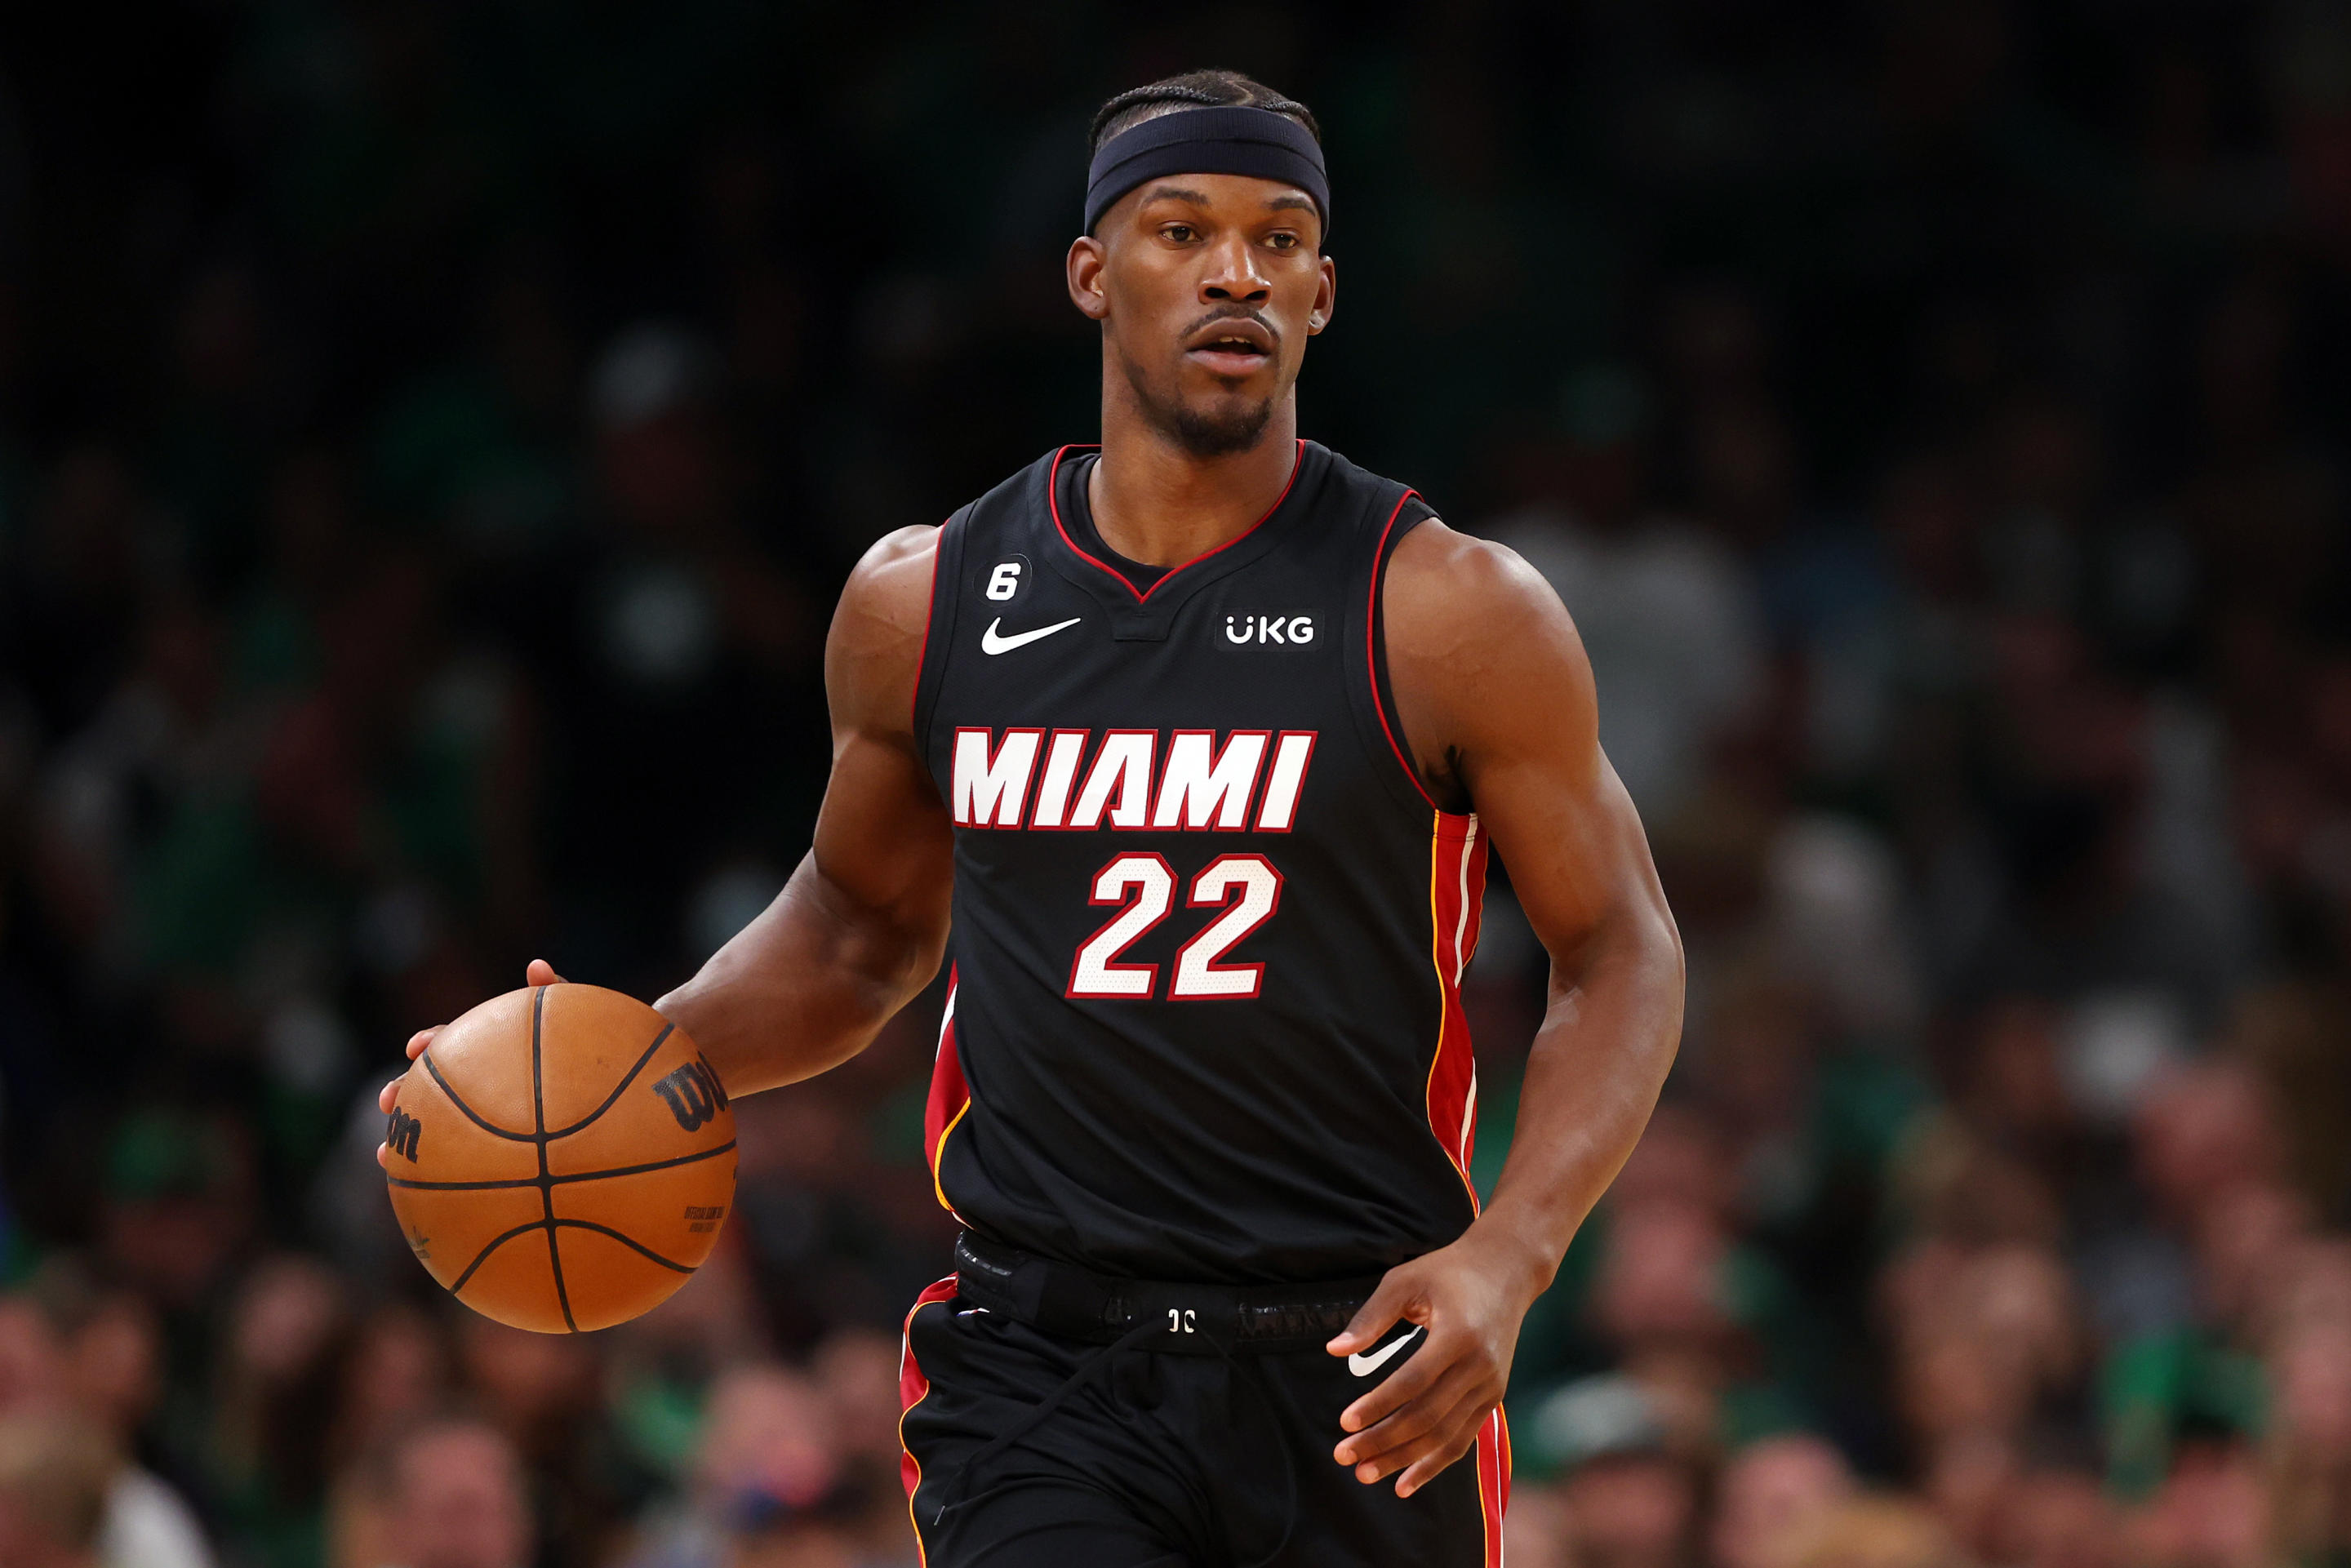 Miami Heat forward Jimmy Butler is six-time All-Star and has five All-NBA selections, but an NBA title could make him a first-ballot Hall of Famer. (Maddie Meyer/Getty Images)